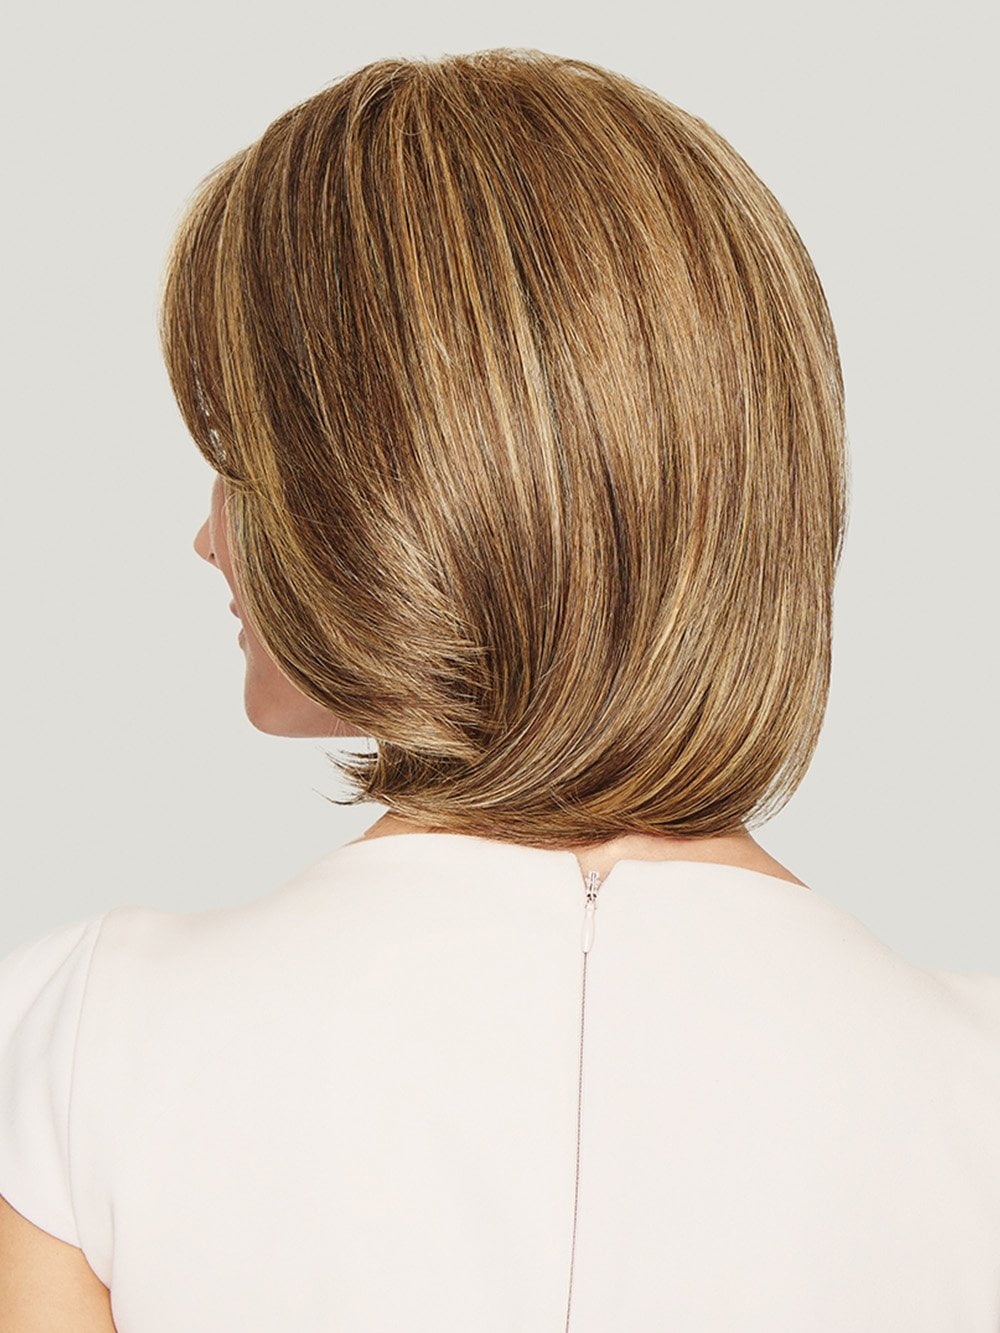 Color shown: Brown Blonde | Medium to light brown with salon highlights 